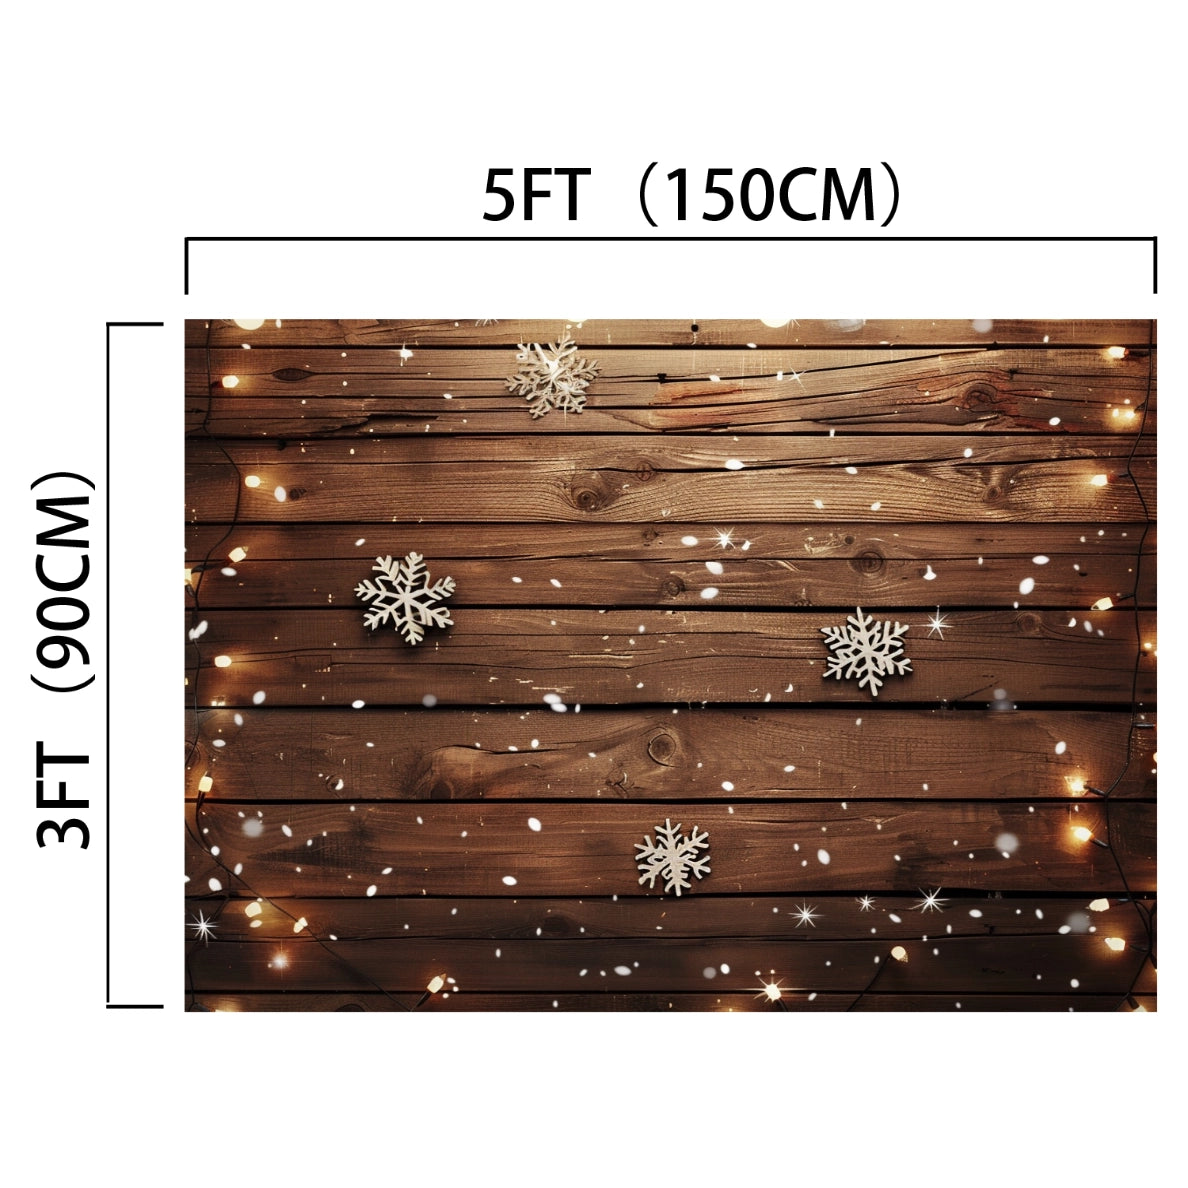 An ideasbackdrop Wood Photo Backdrop Snowflake Brown Wooden Wall Background Photography for Party Wedding Baby Photoshoot measuring 5 feet by 3 feet (150 cm by 90 cm), decorated with string lights and snowflakes.